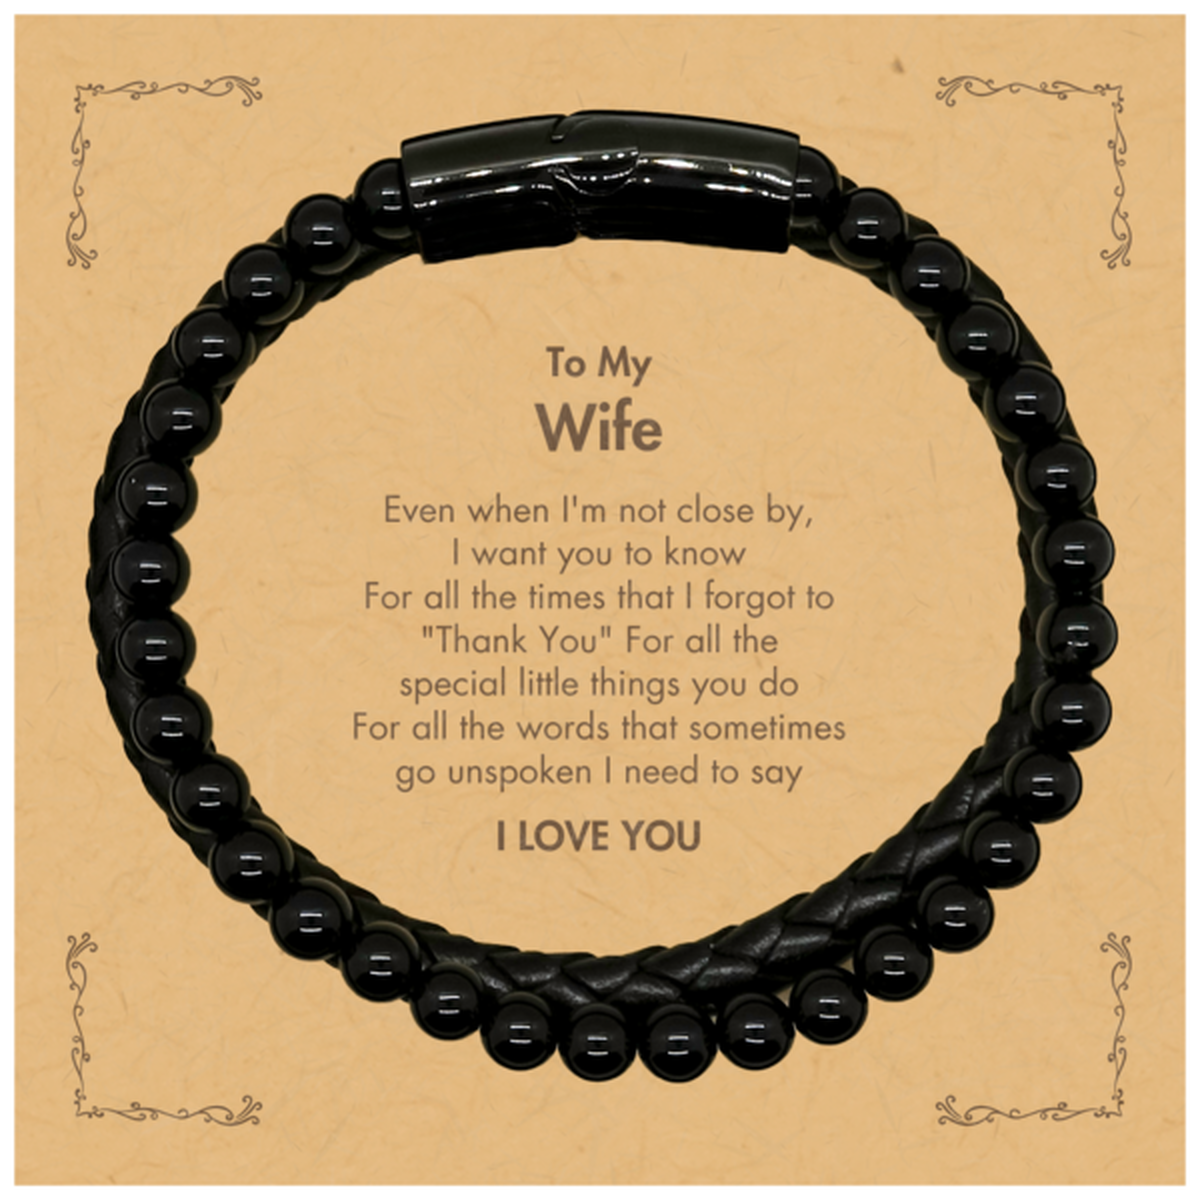 Thank You Gifts for Wife, Keepsake Stone Leather Bracelets Gifts for Wife Birthday Mother's day Father's Day Wife For all the words That sometimes go unspoken I need to say I LOVE YOU